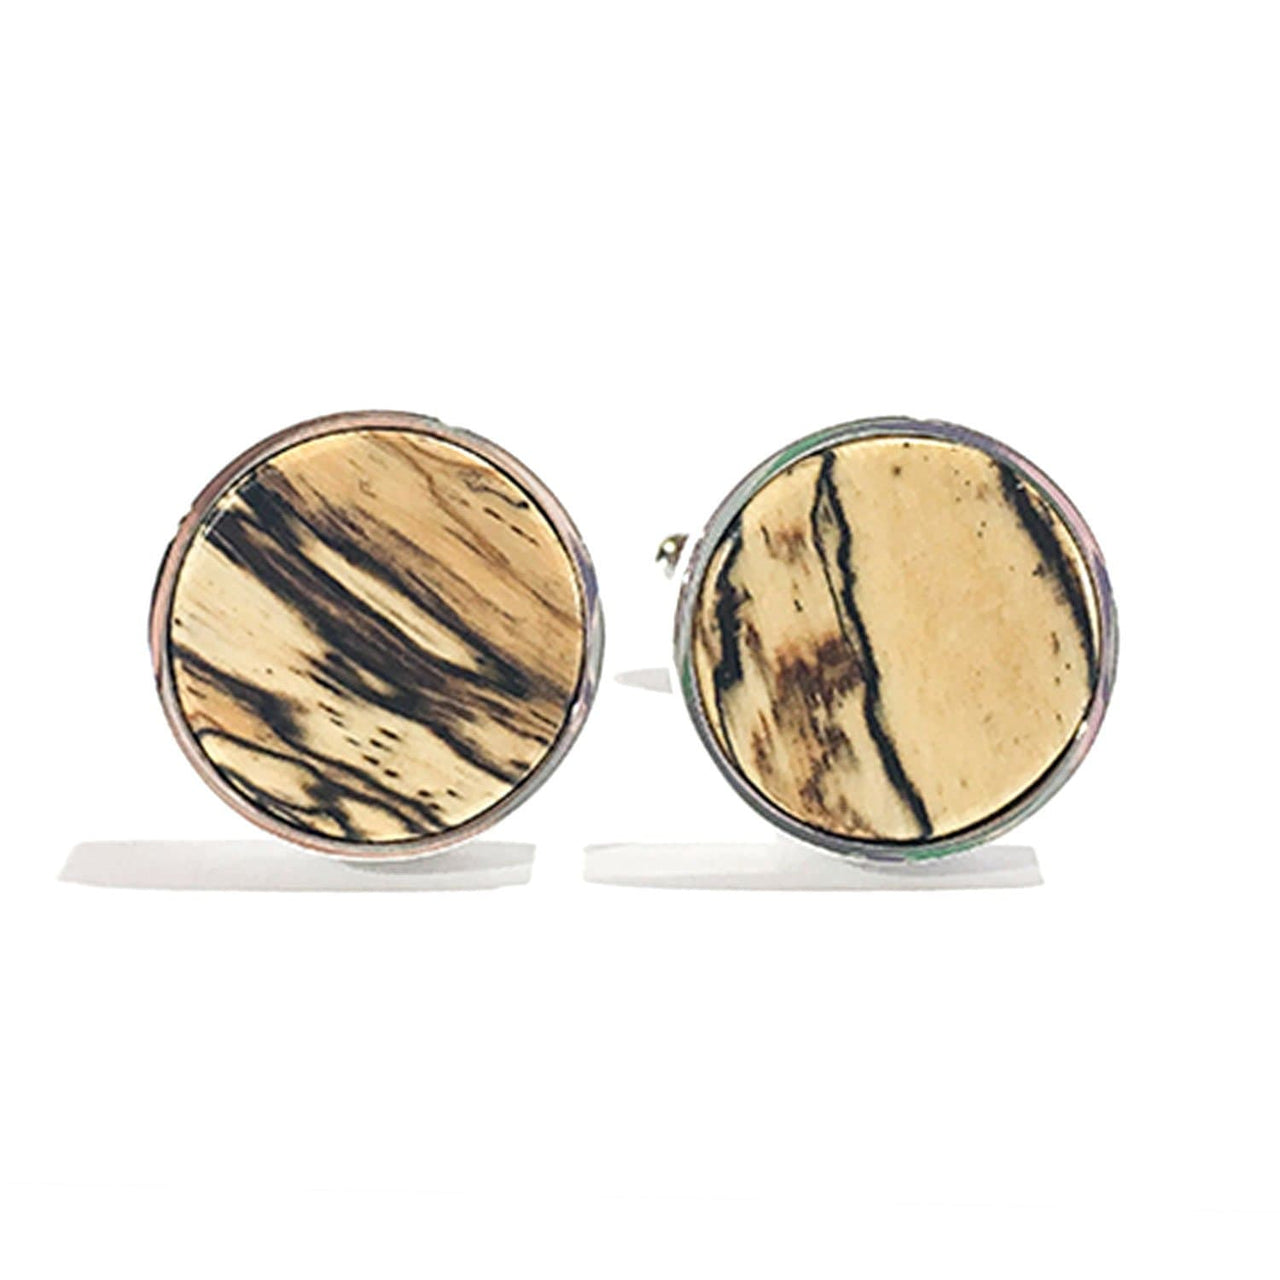 The Wood Bat Factory Cuff Links Spalted Tamarind Wood Cuff Links